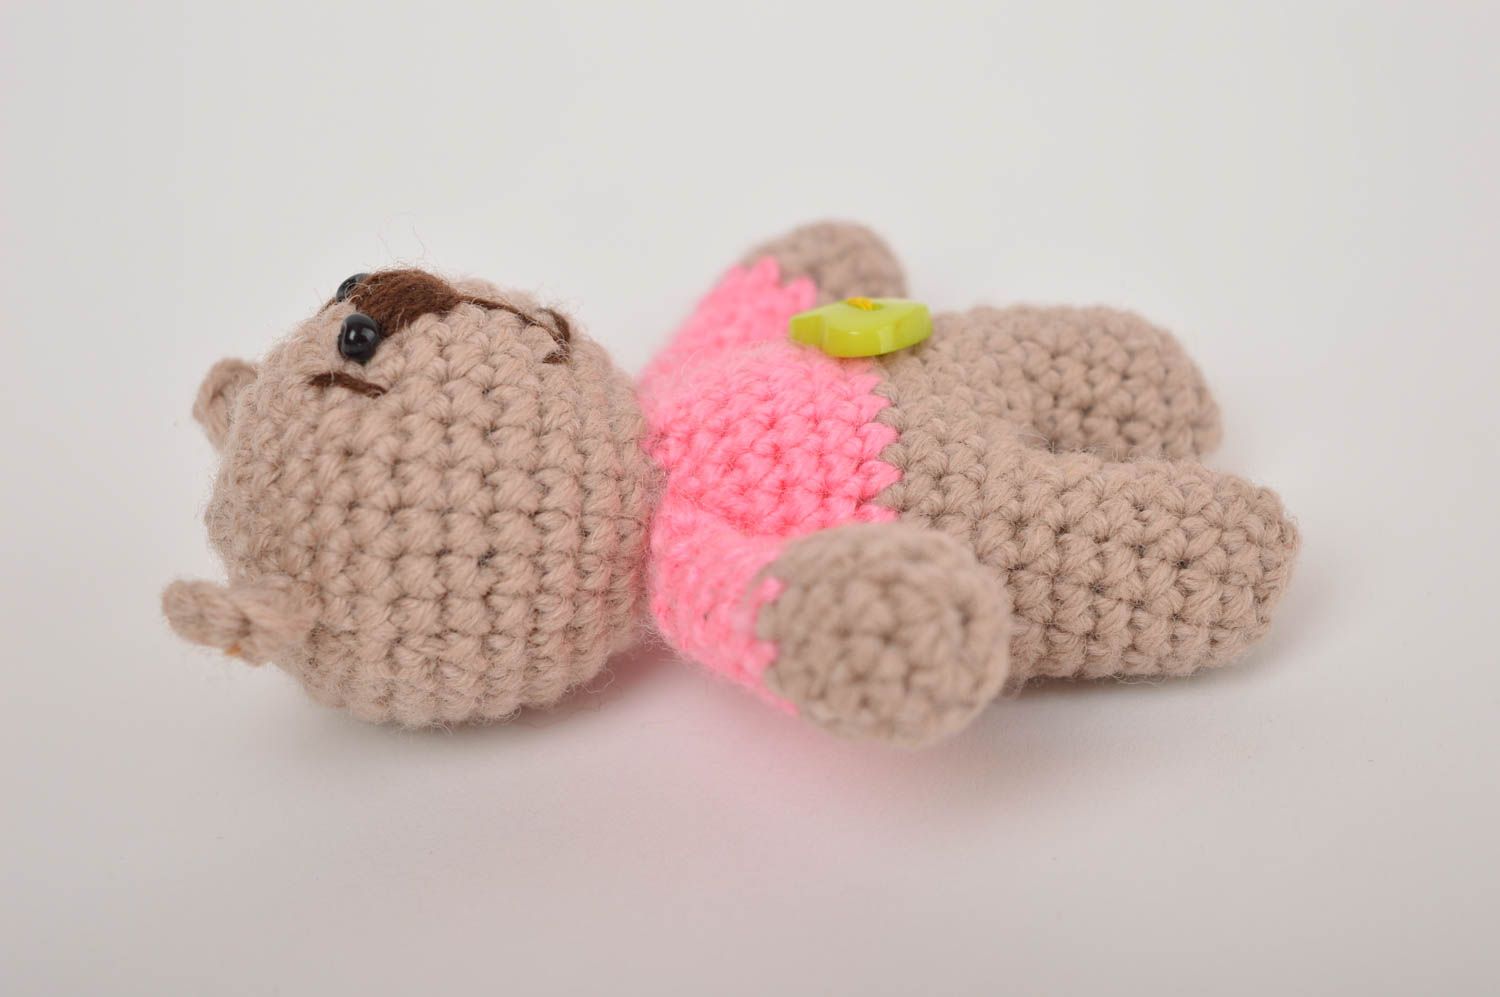 Handmade crocheted soft toy stuffed toys for children hand-crocheted toys photo 4